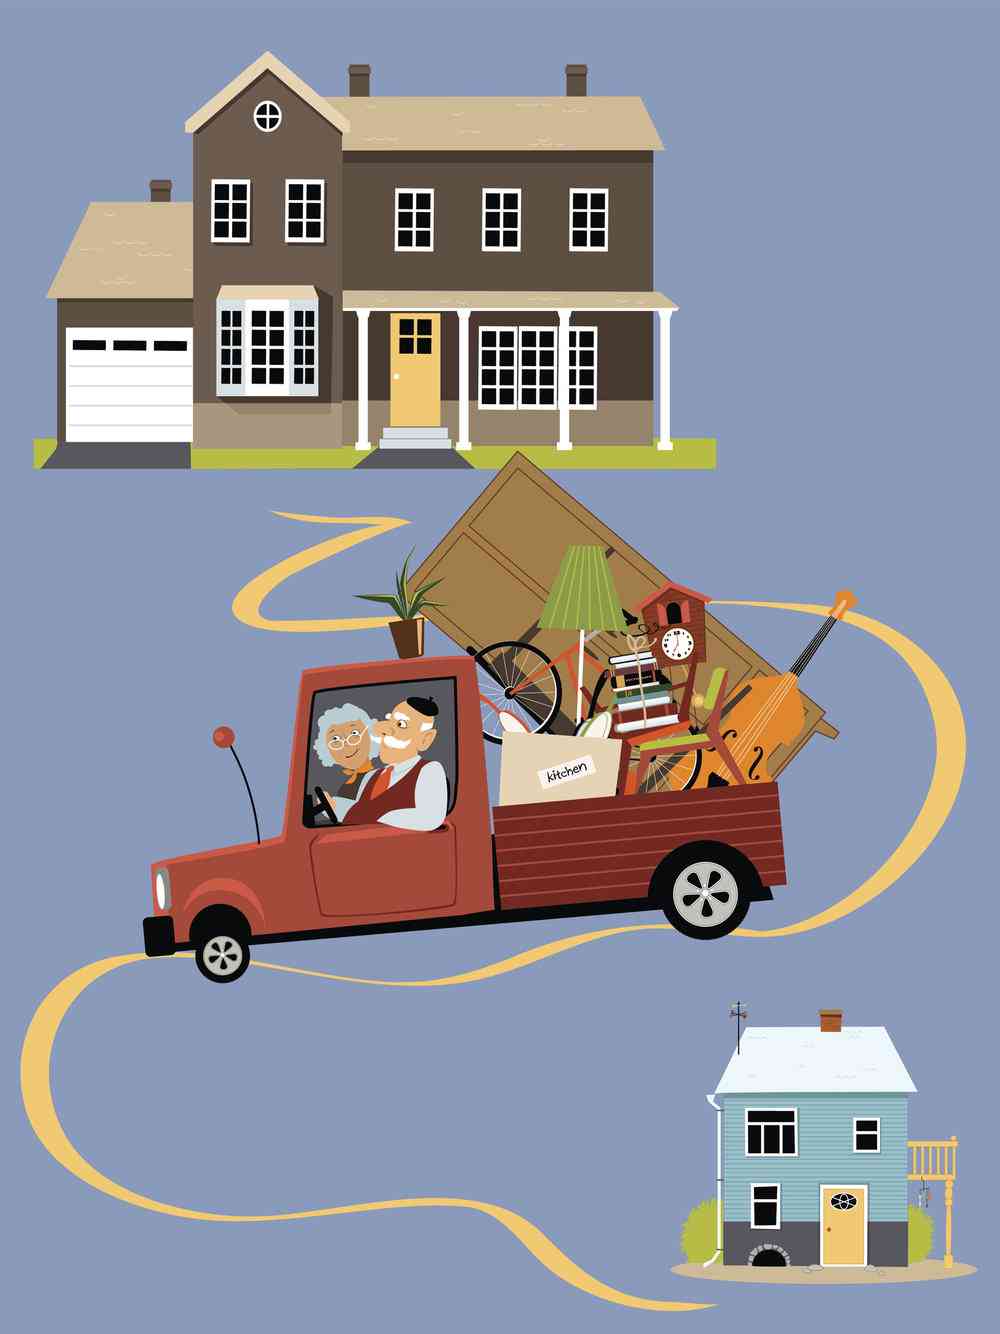 image representing moving from big to small house